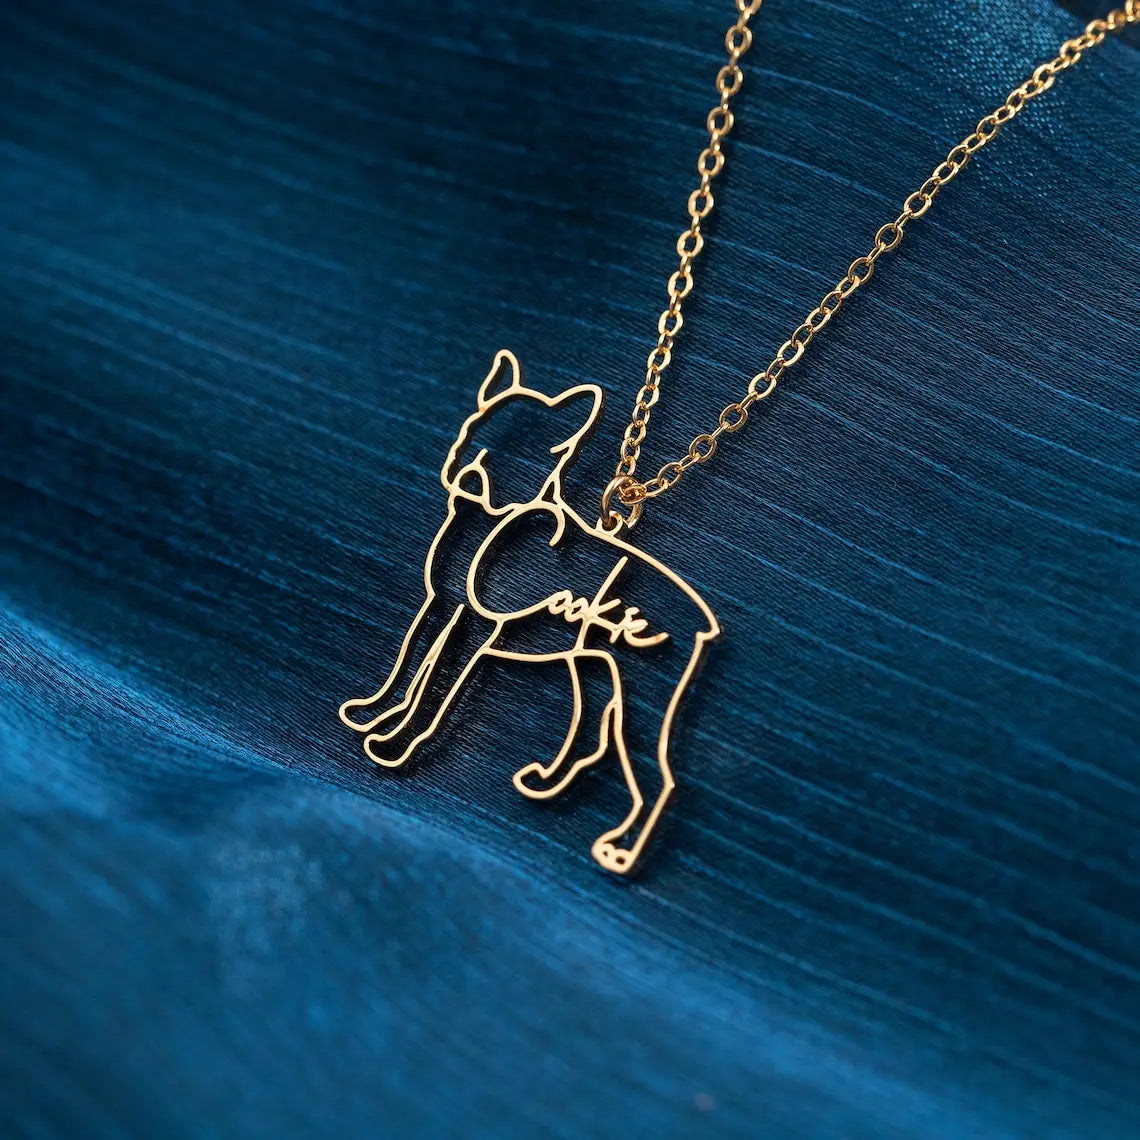 Personalized Necklace - Dog Silhouette & Name